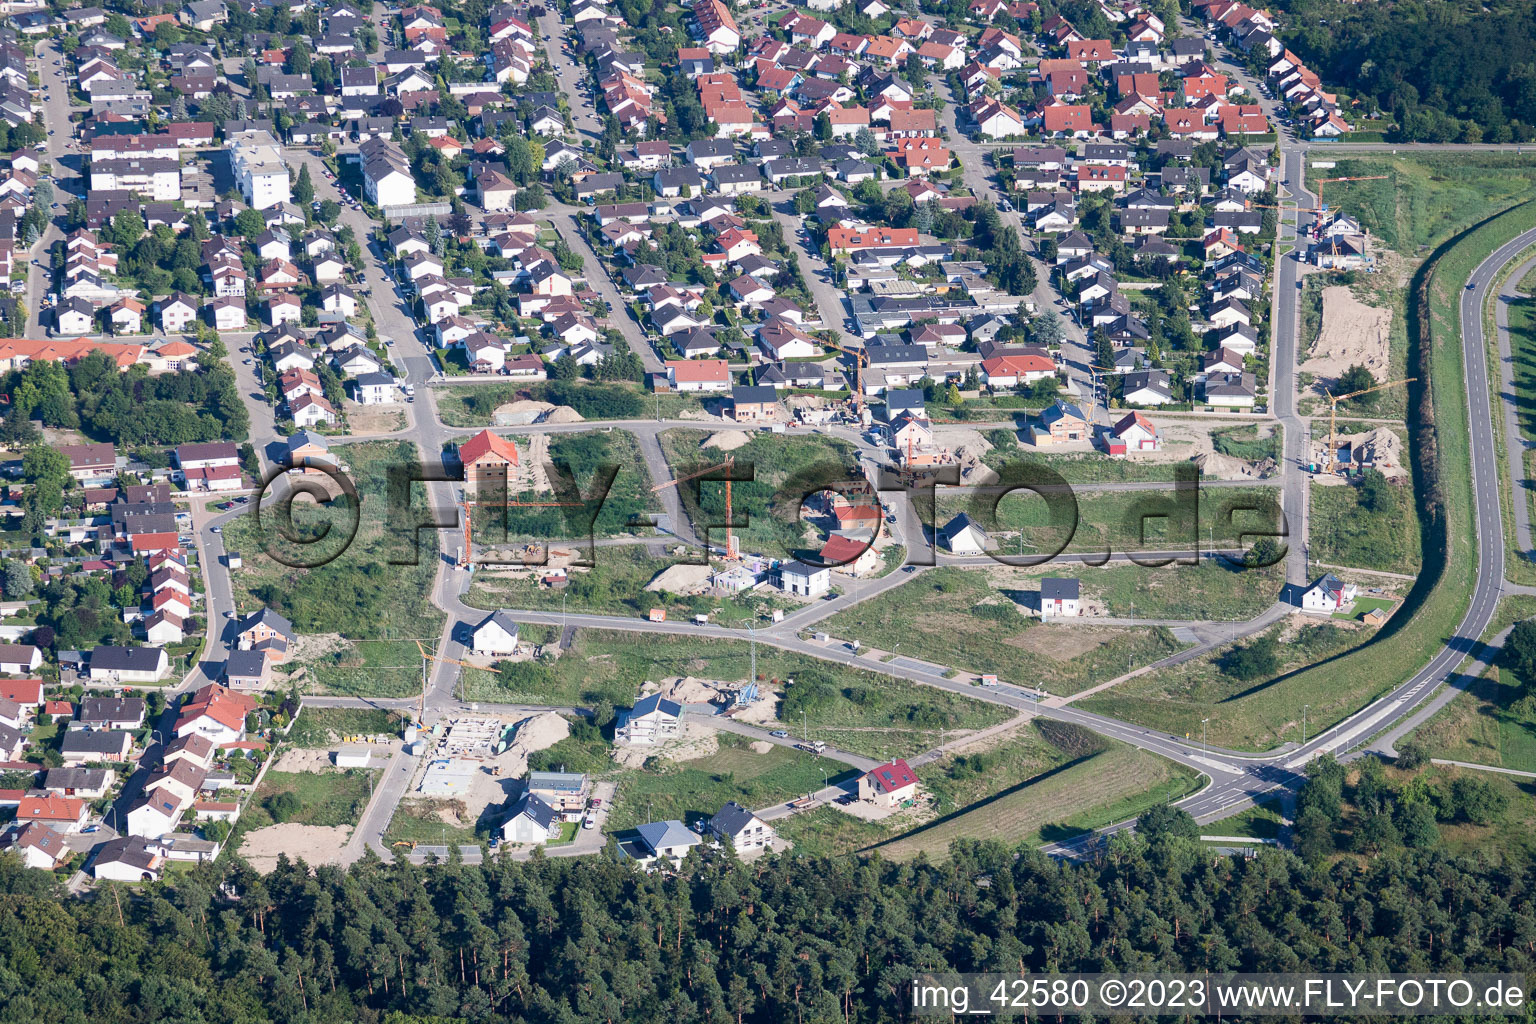 New development area west in Jockgrim in the state Rhineland-Palatinate, Germany from above